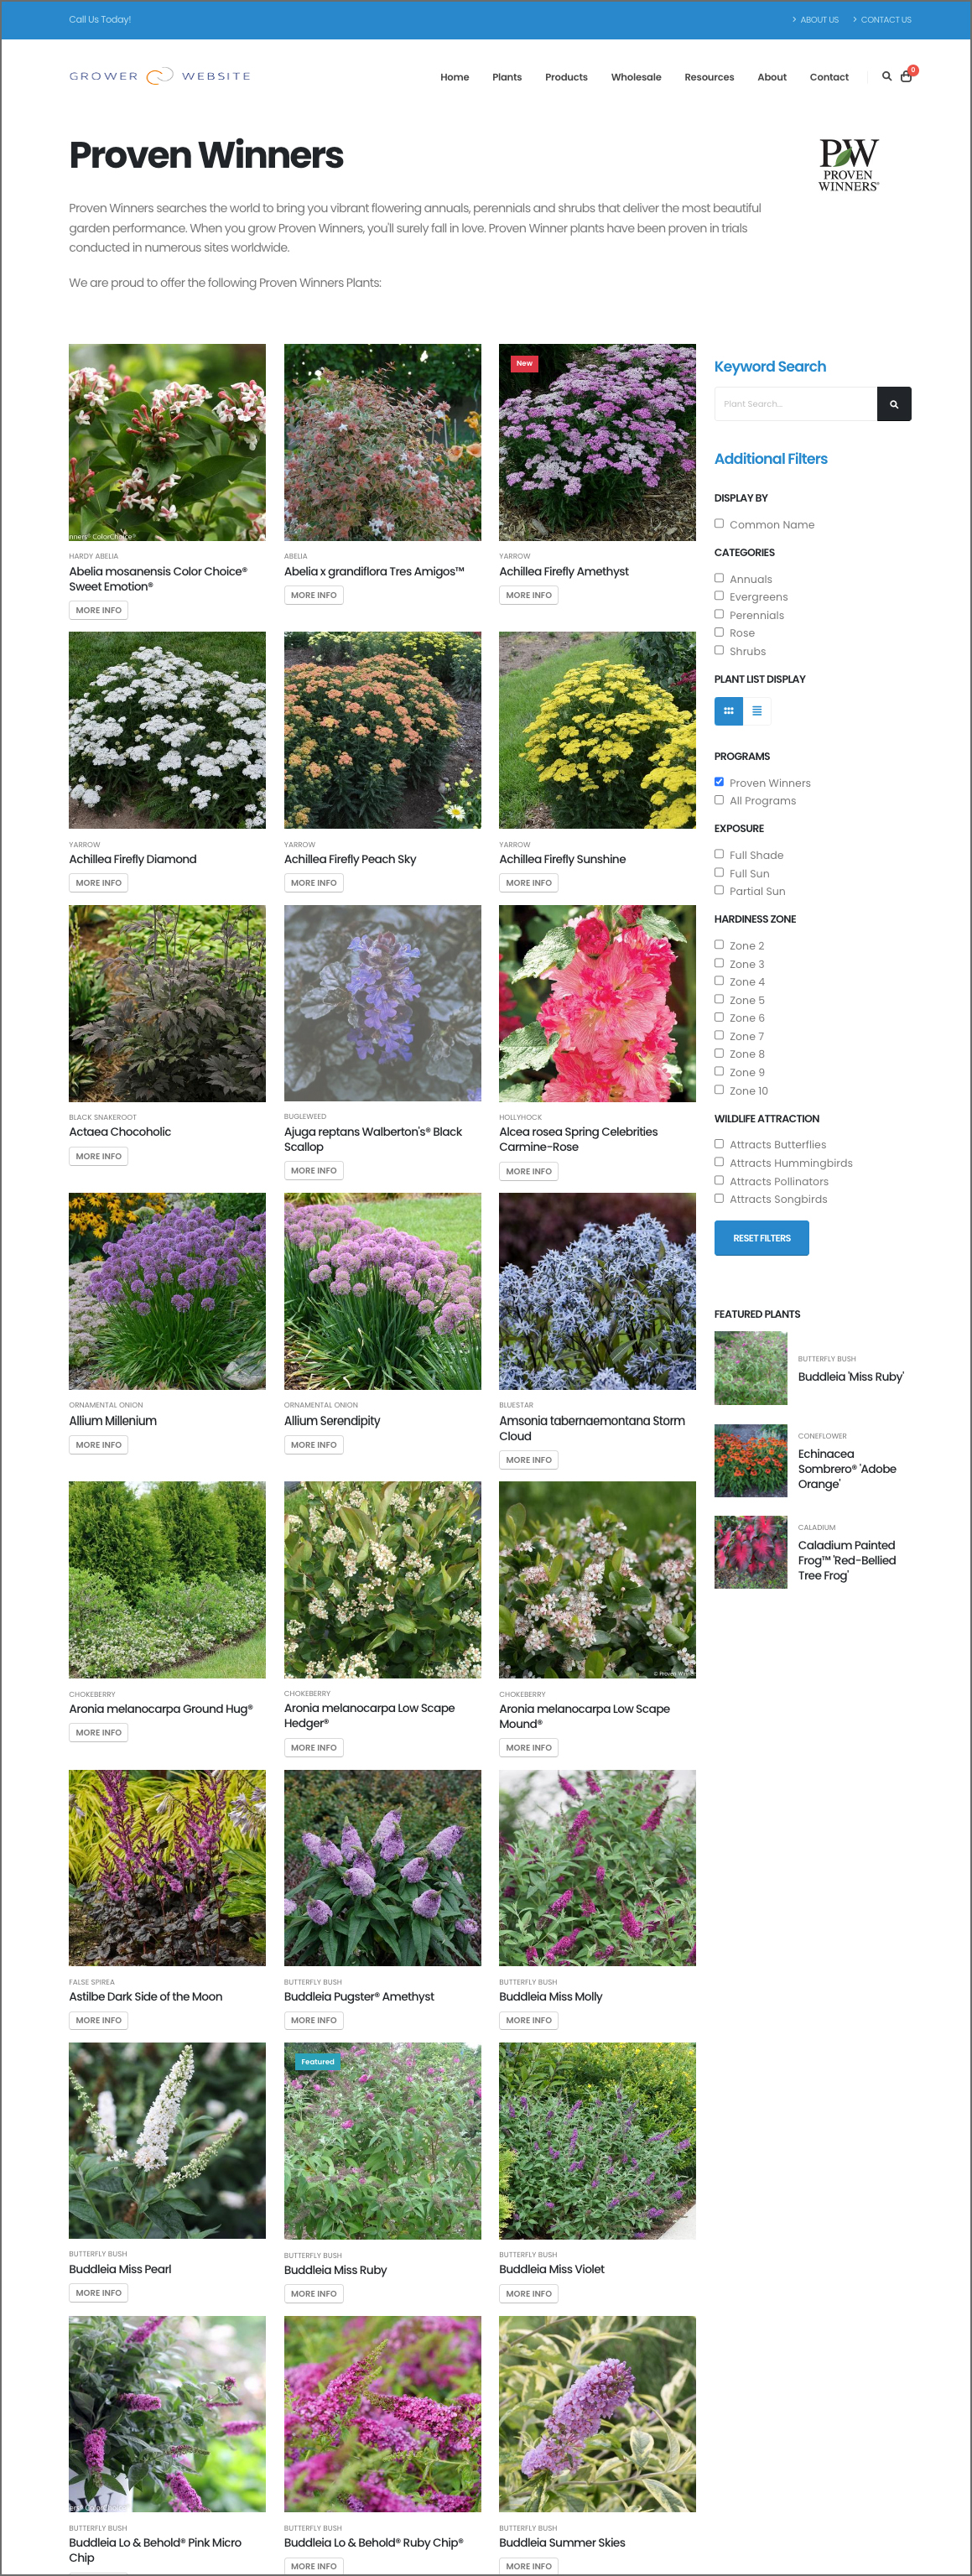 By clicking on the logo on a plant detail page, your website visitors can quickly see all corresponding plants you sell assigned to that breeder or program.